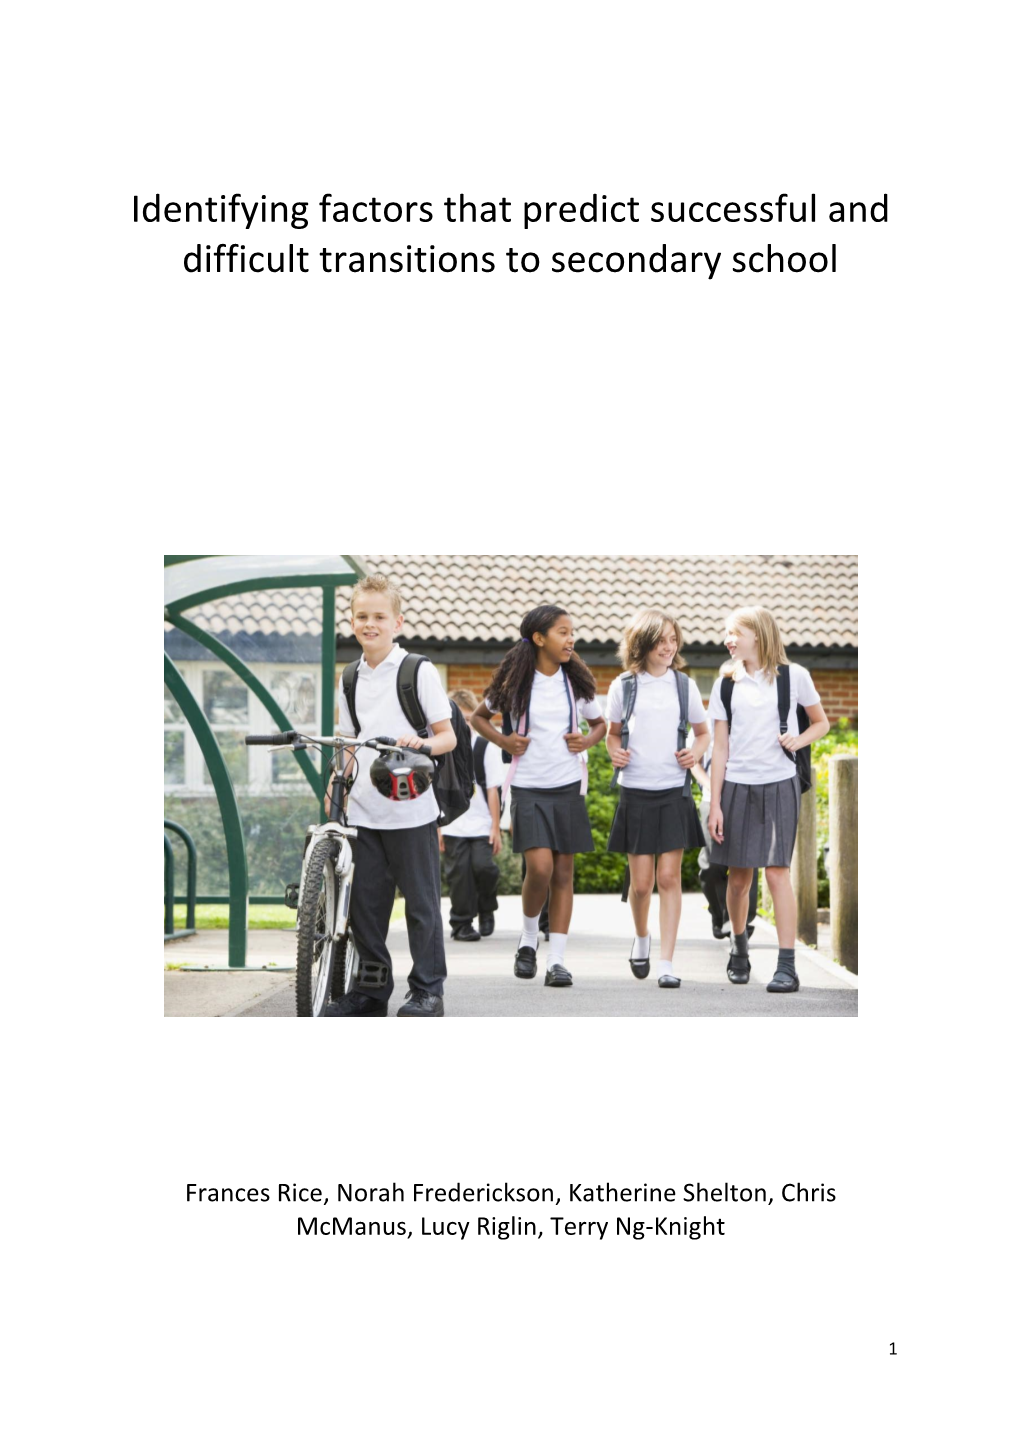 Identifying Factors That Predict Successful and Difficult Transitions to Secondary School